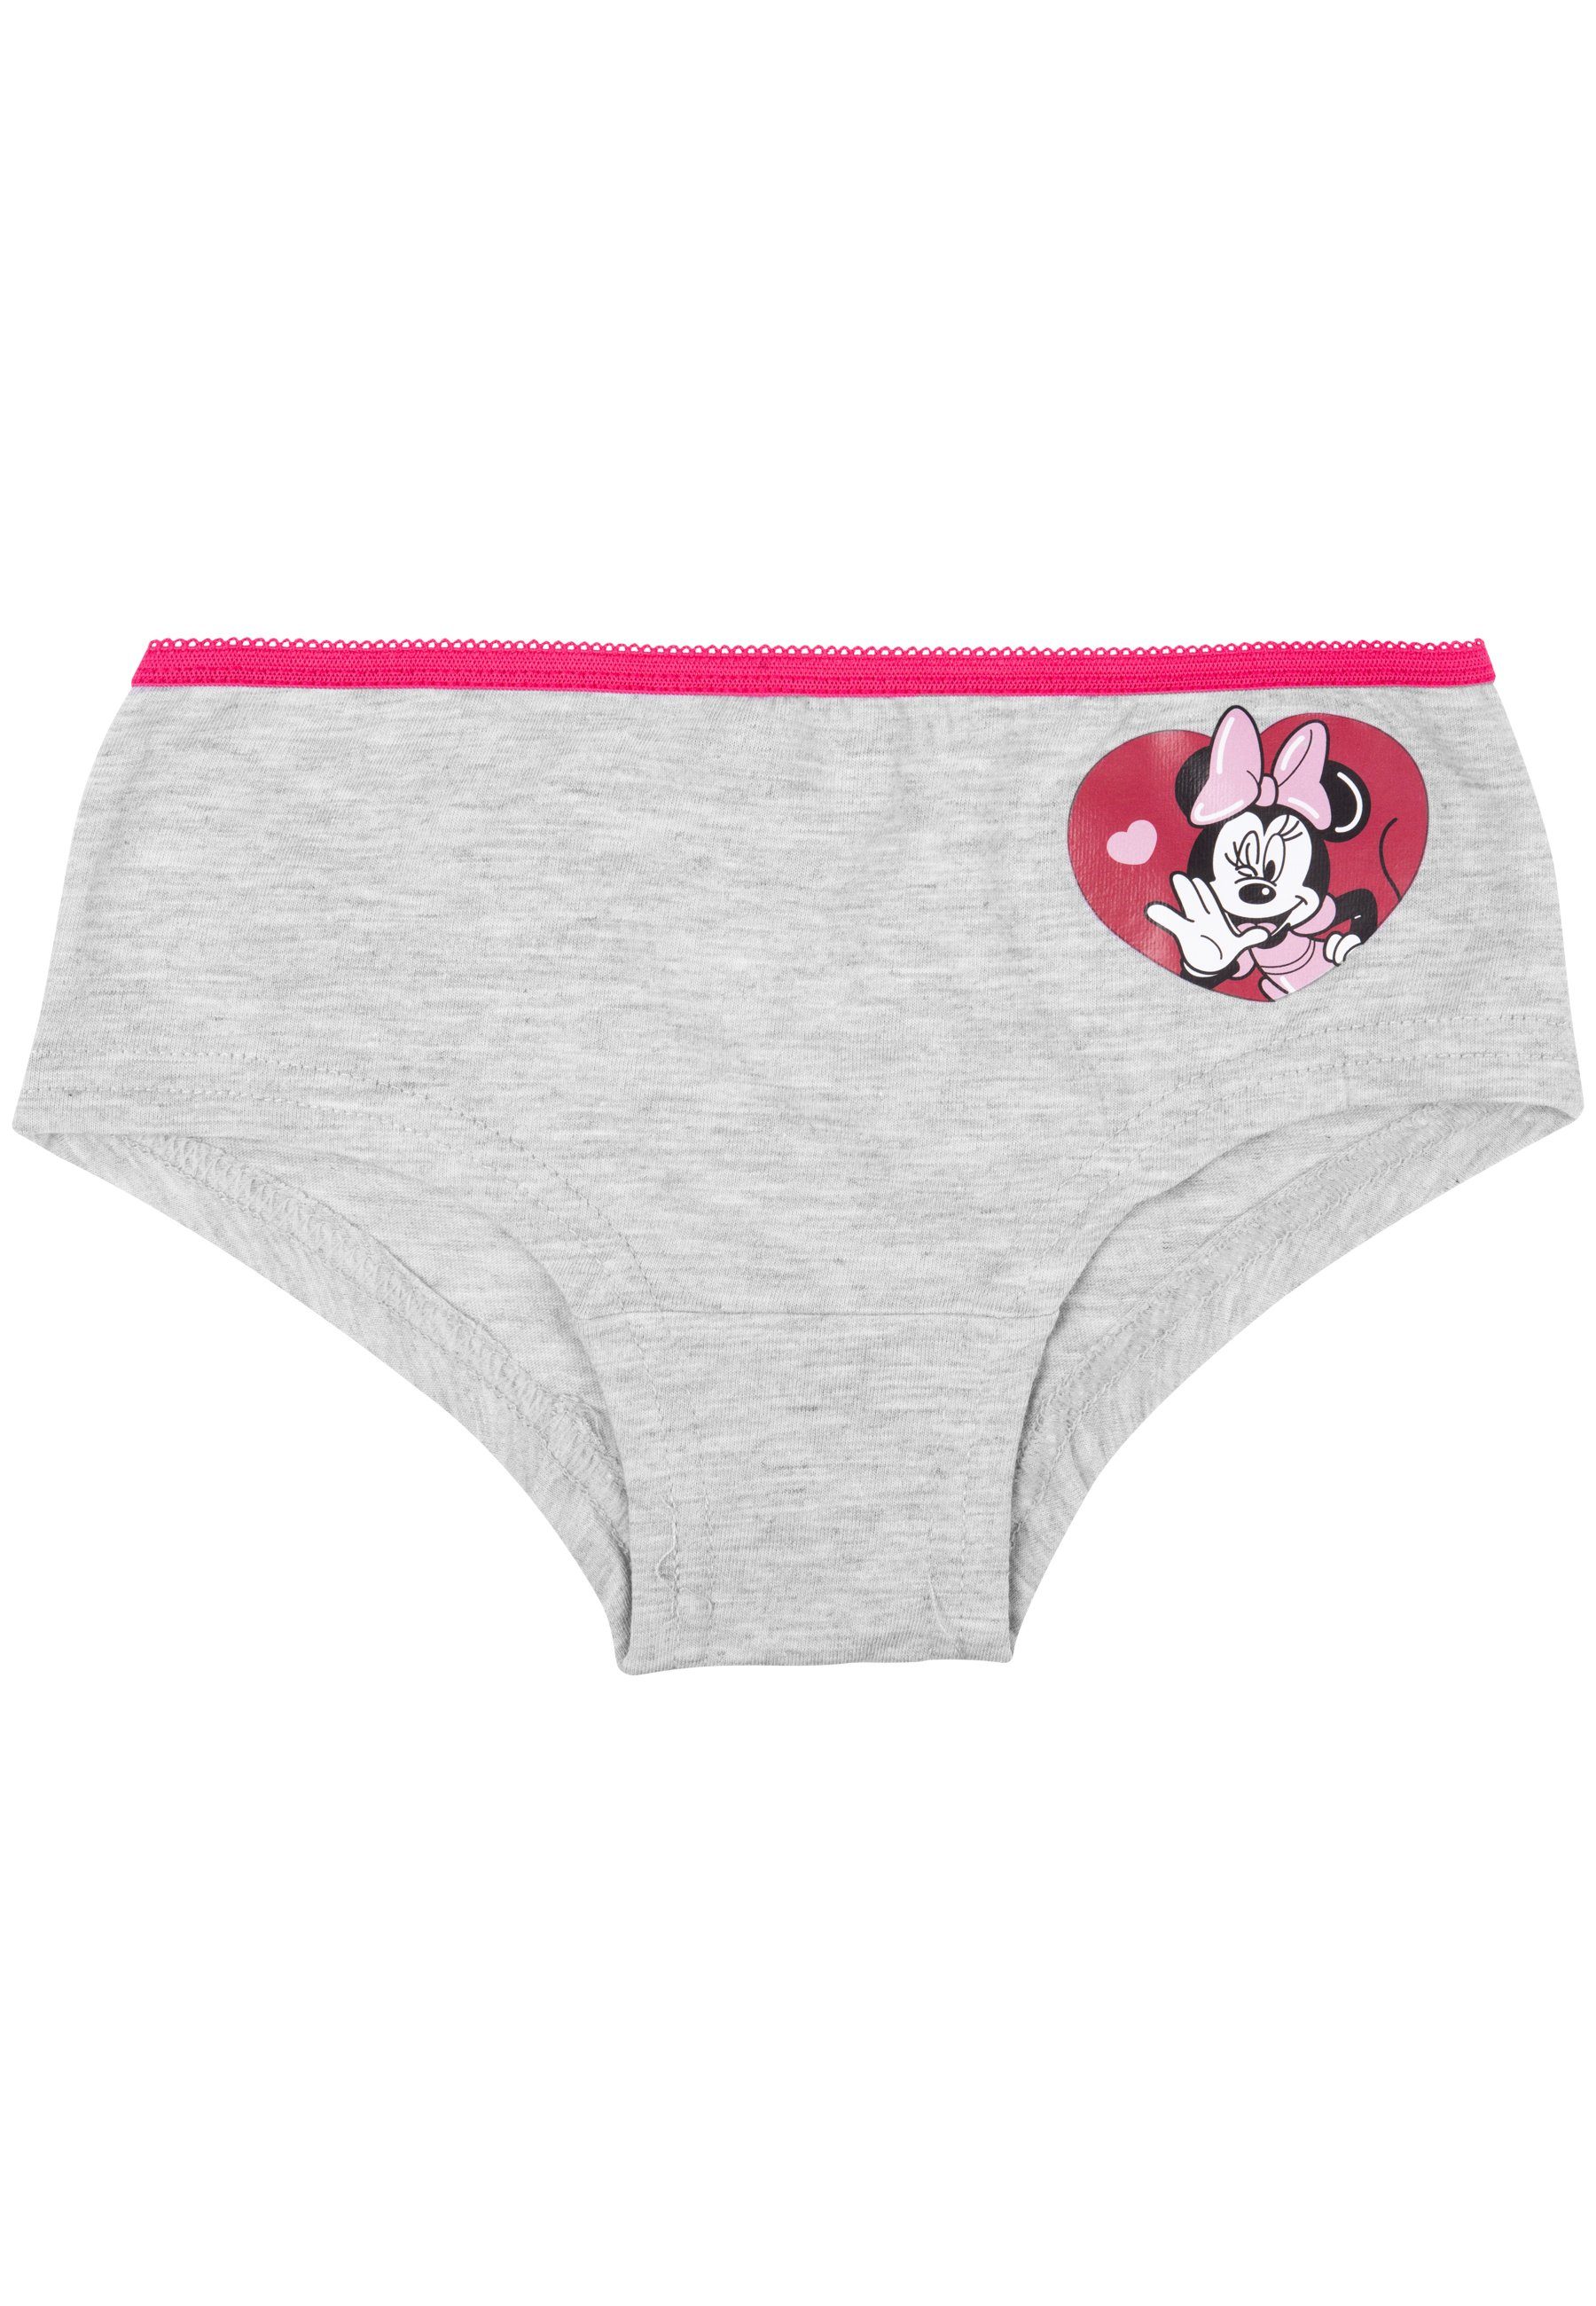 Pack Mouse Panty United Disney Minnie Labels® 3er Panty